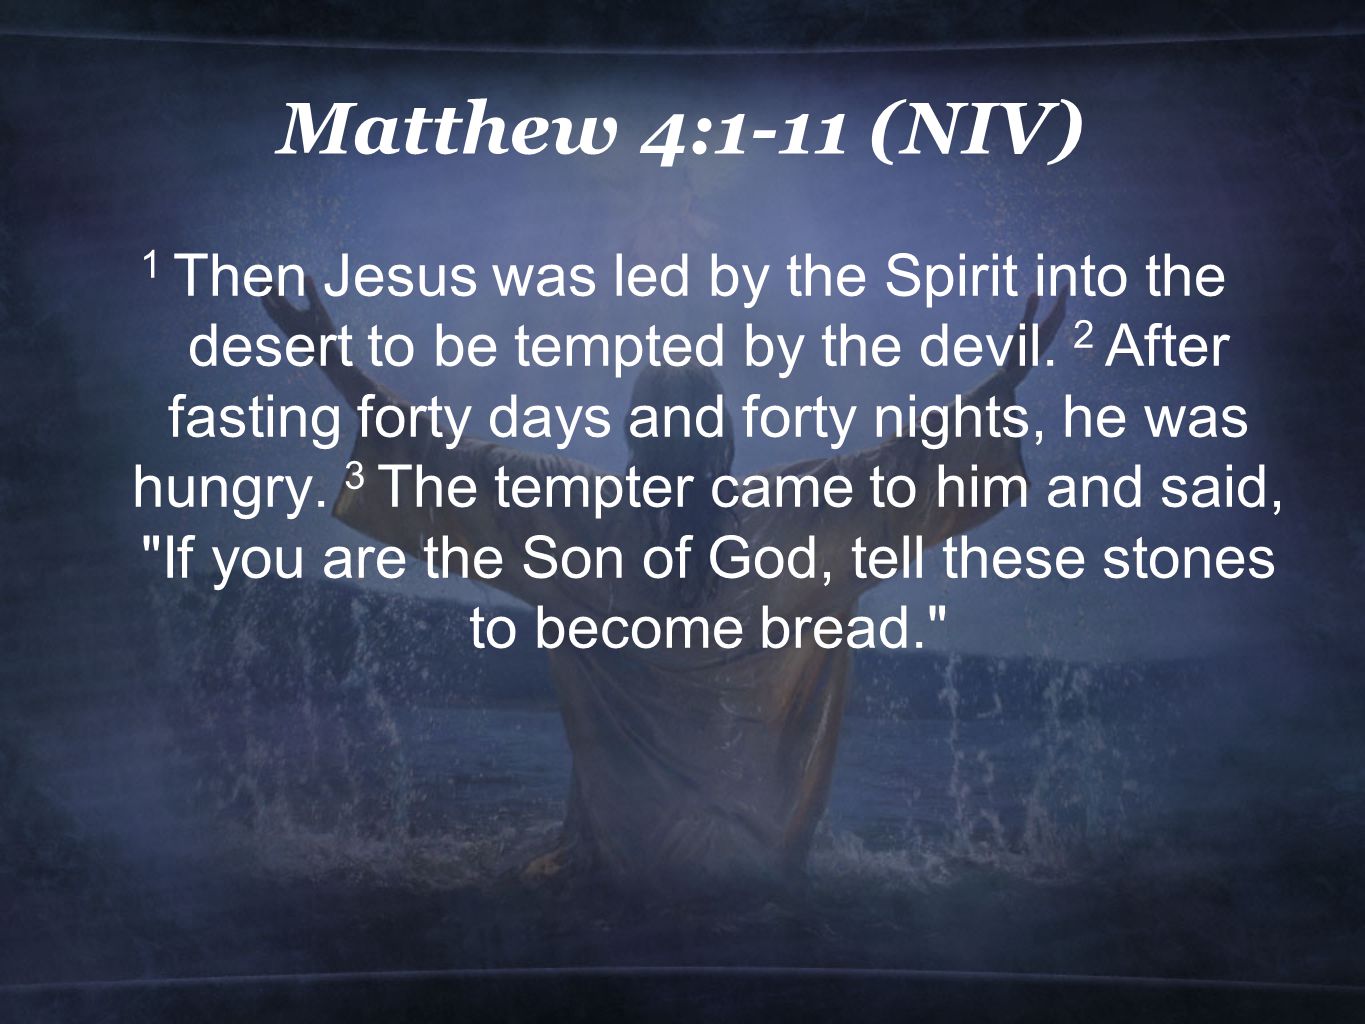 Matthew 4:1-11 (NIV) 1 Then Jesus was led by the Spirit into the desert to be tempted by the devil.